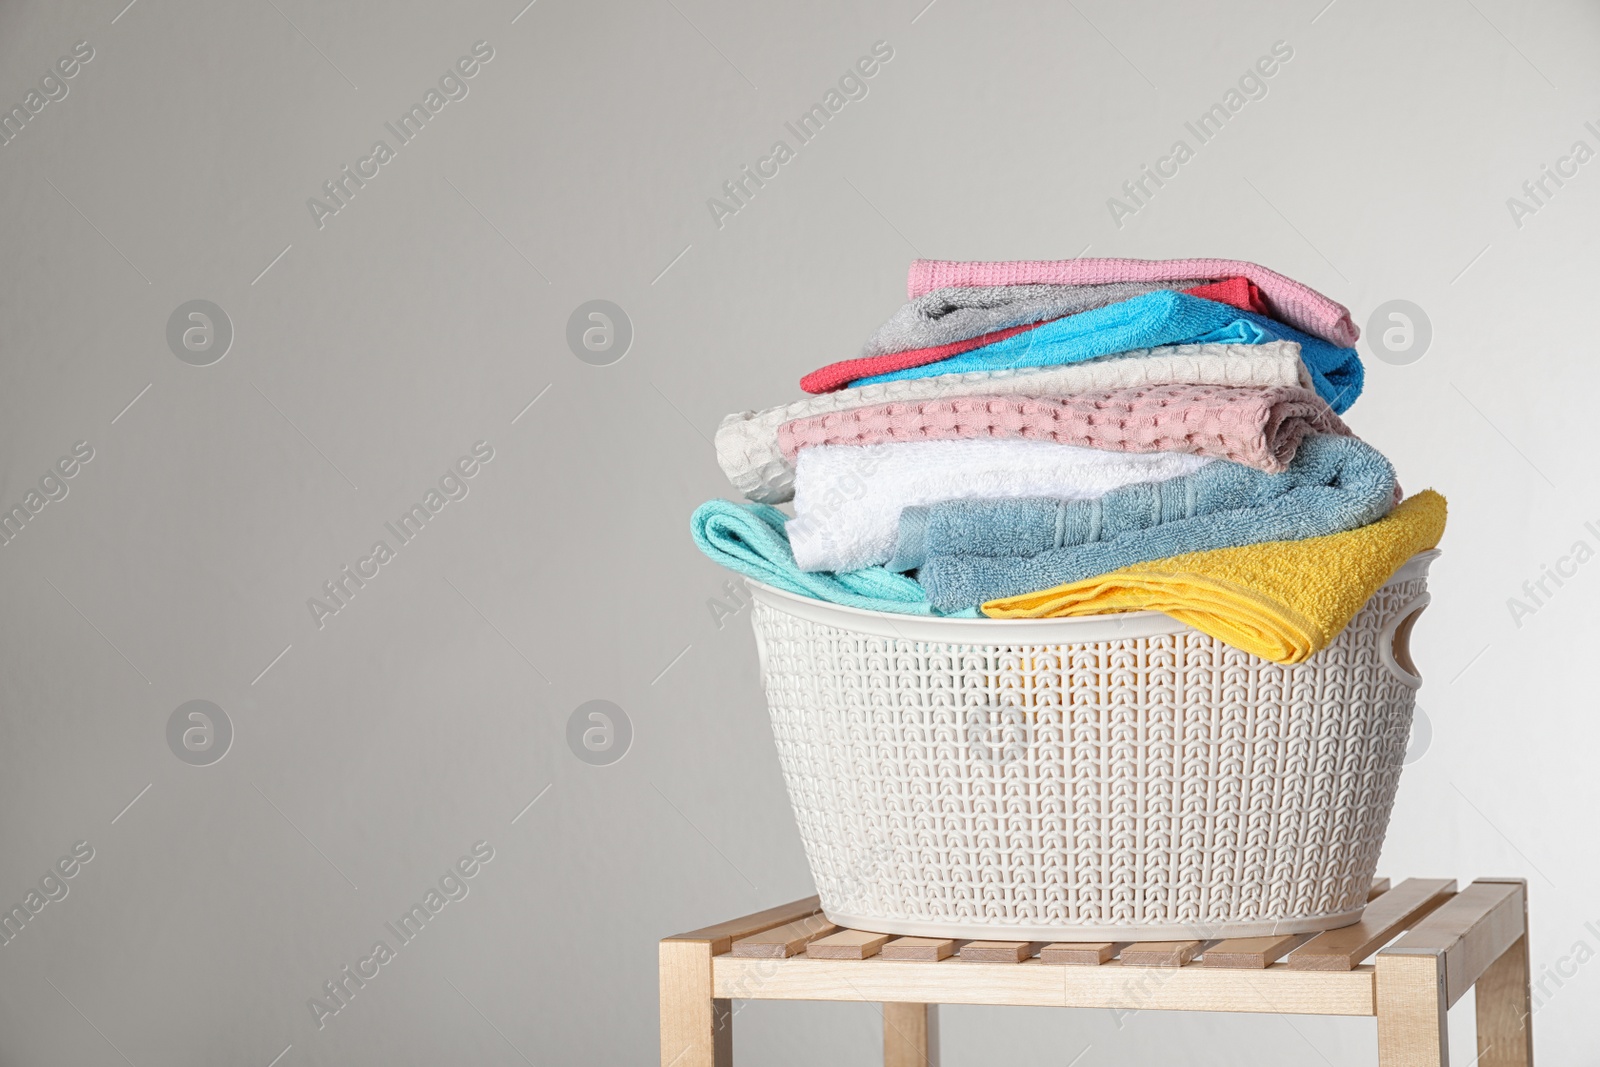 Photo of Laundry basket with clean towels on table against light background. Space for text